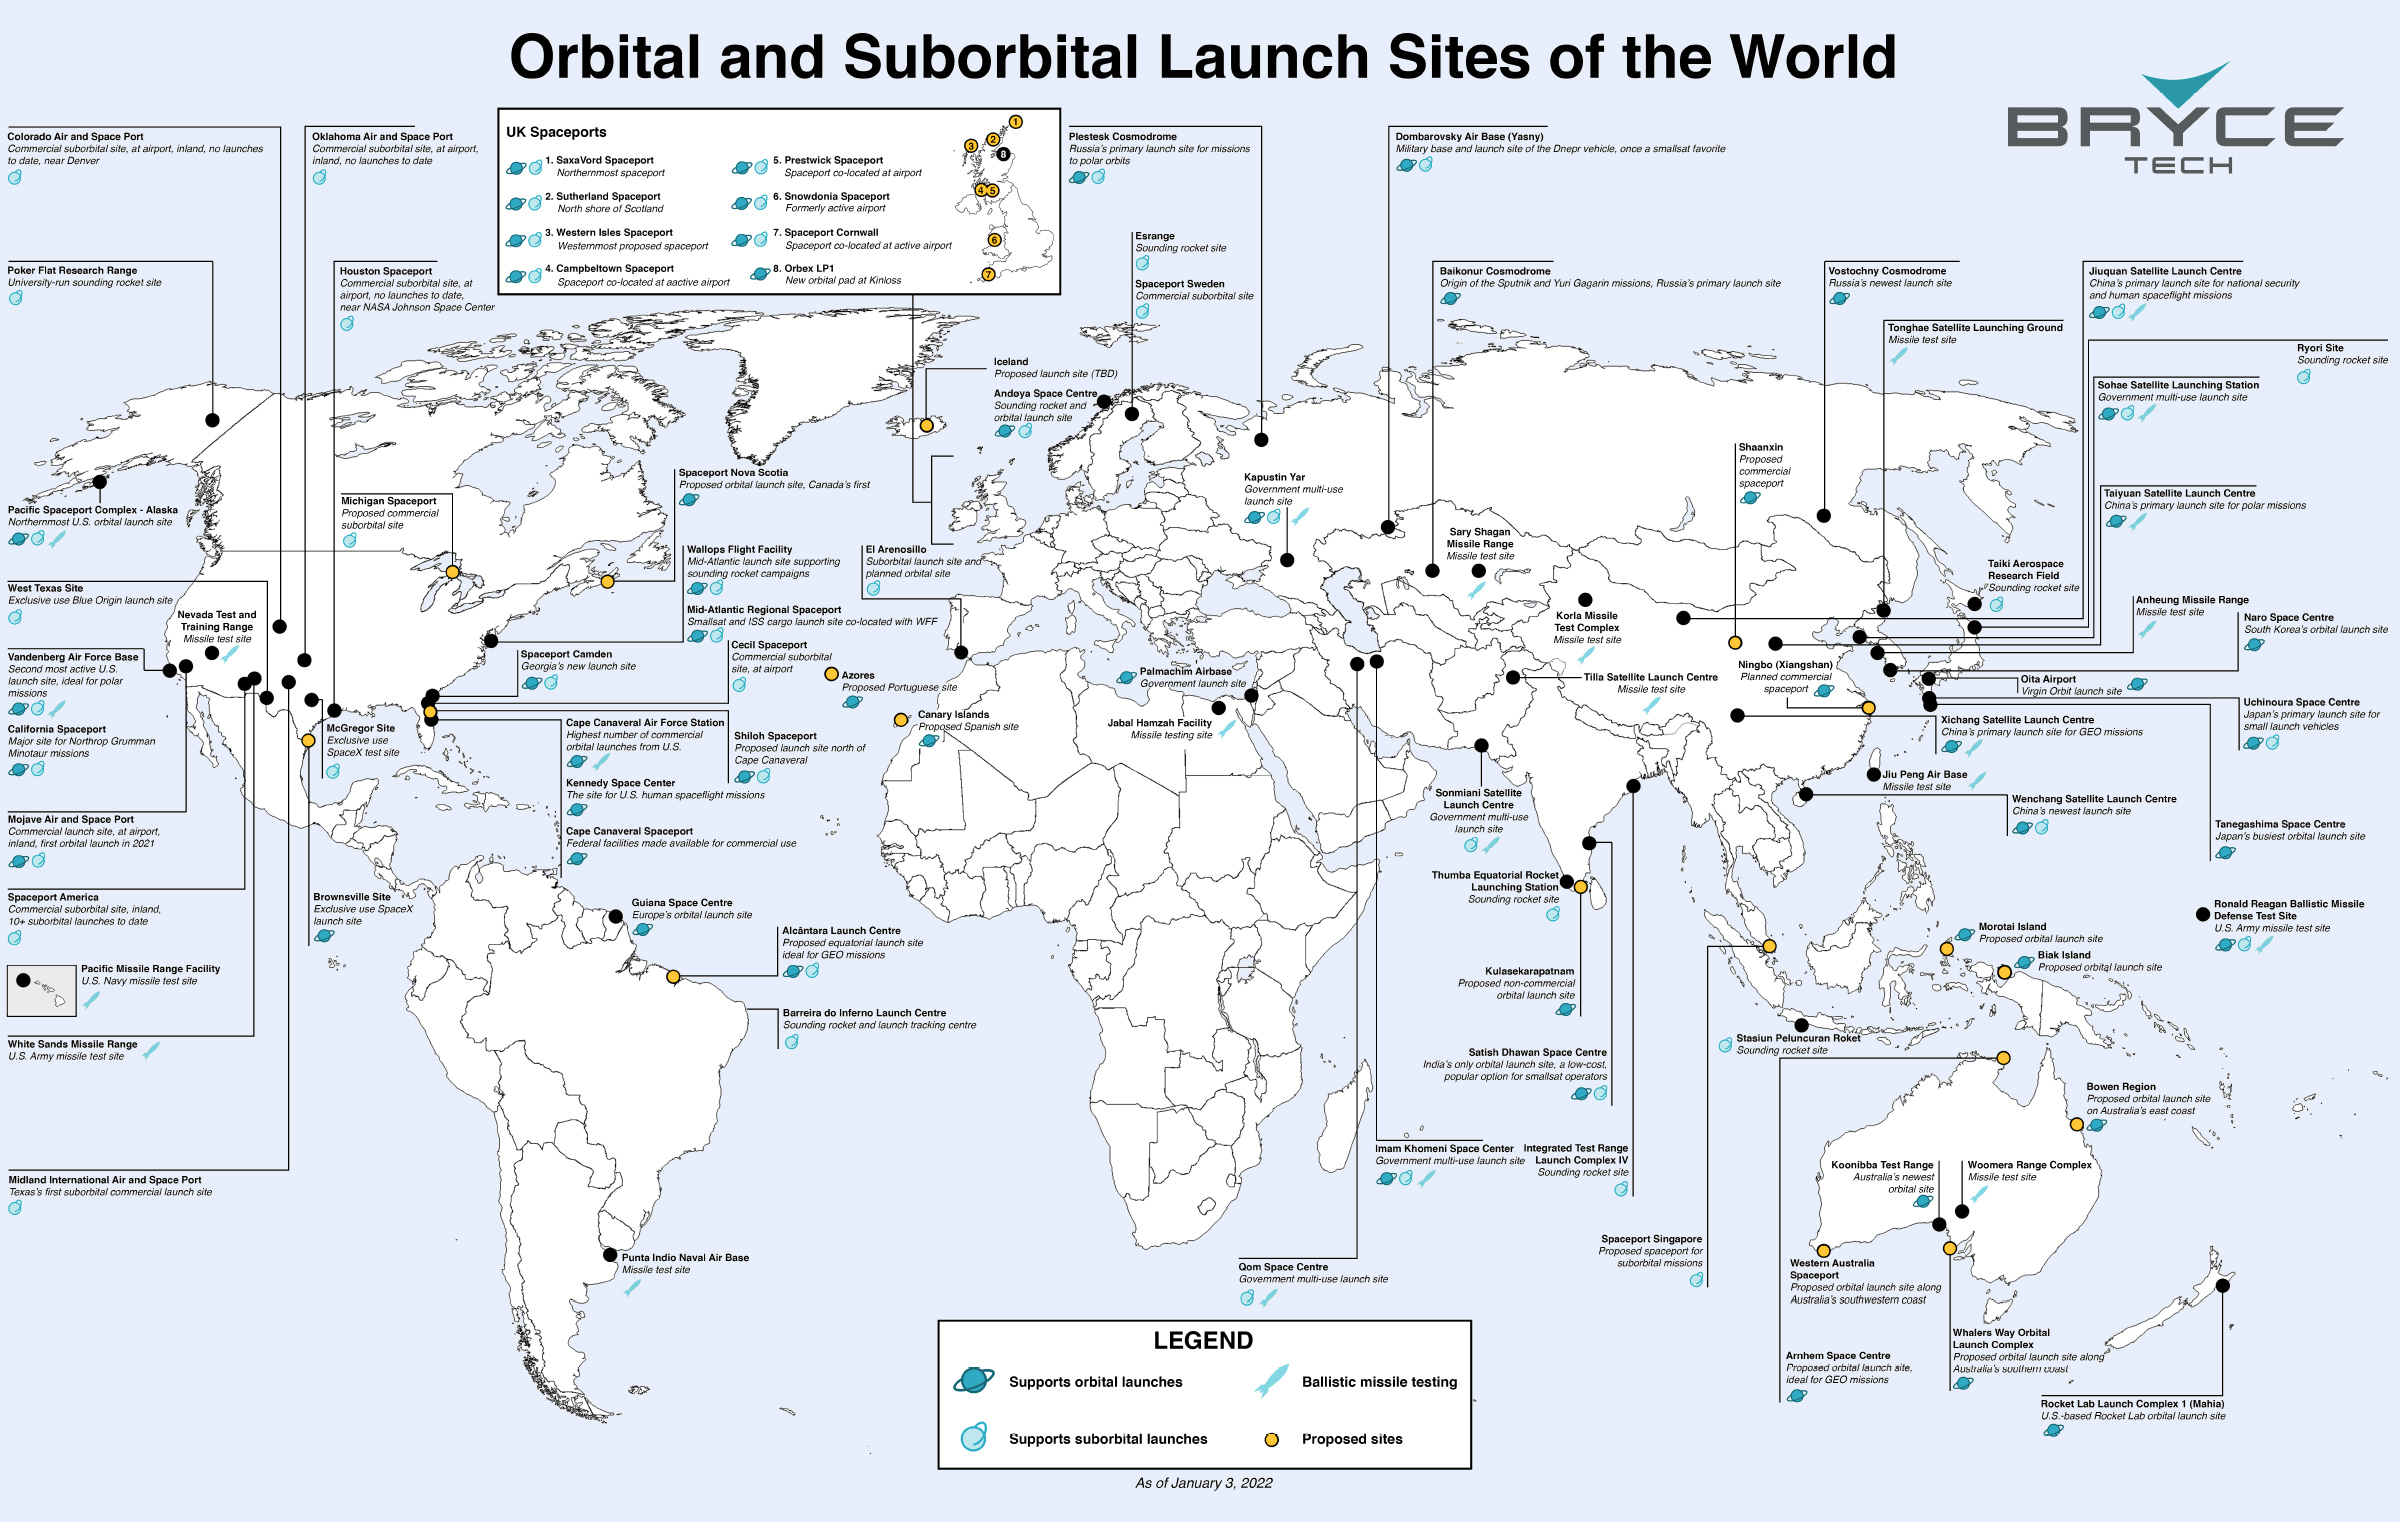 World map showing spaceports and missile test sites